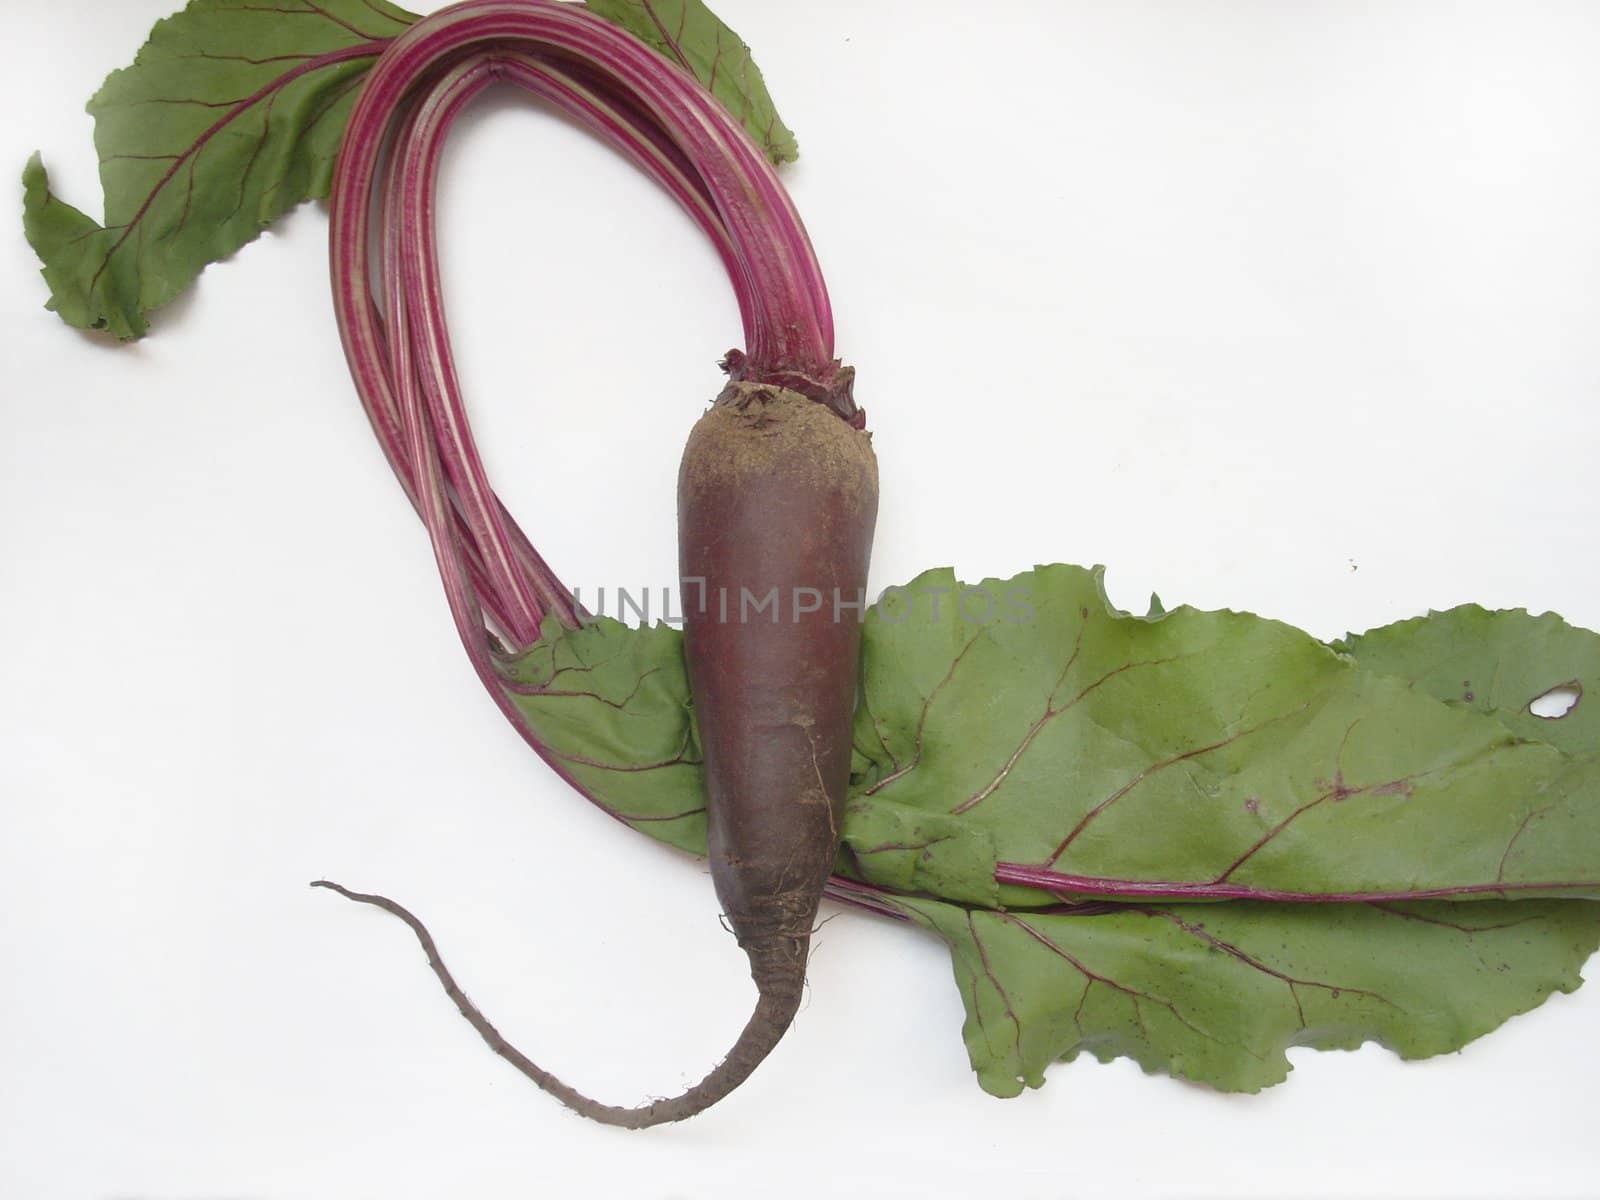 This is a photograph of some fresh and sweet vegetables: radish.